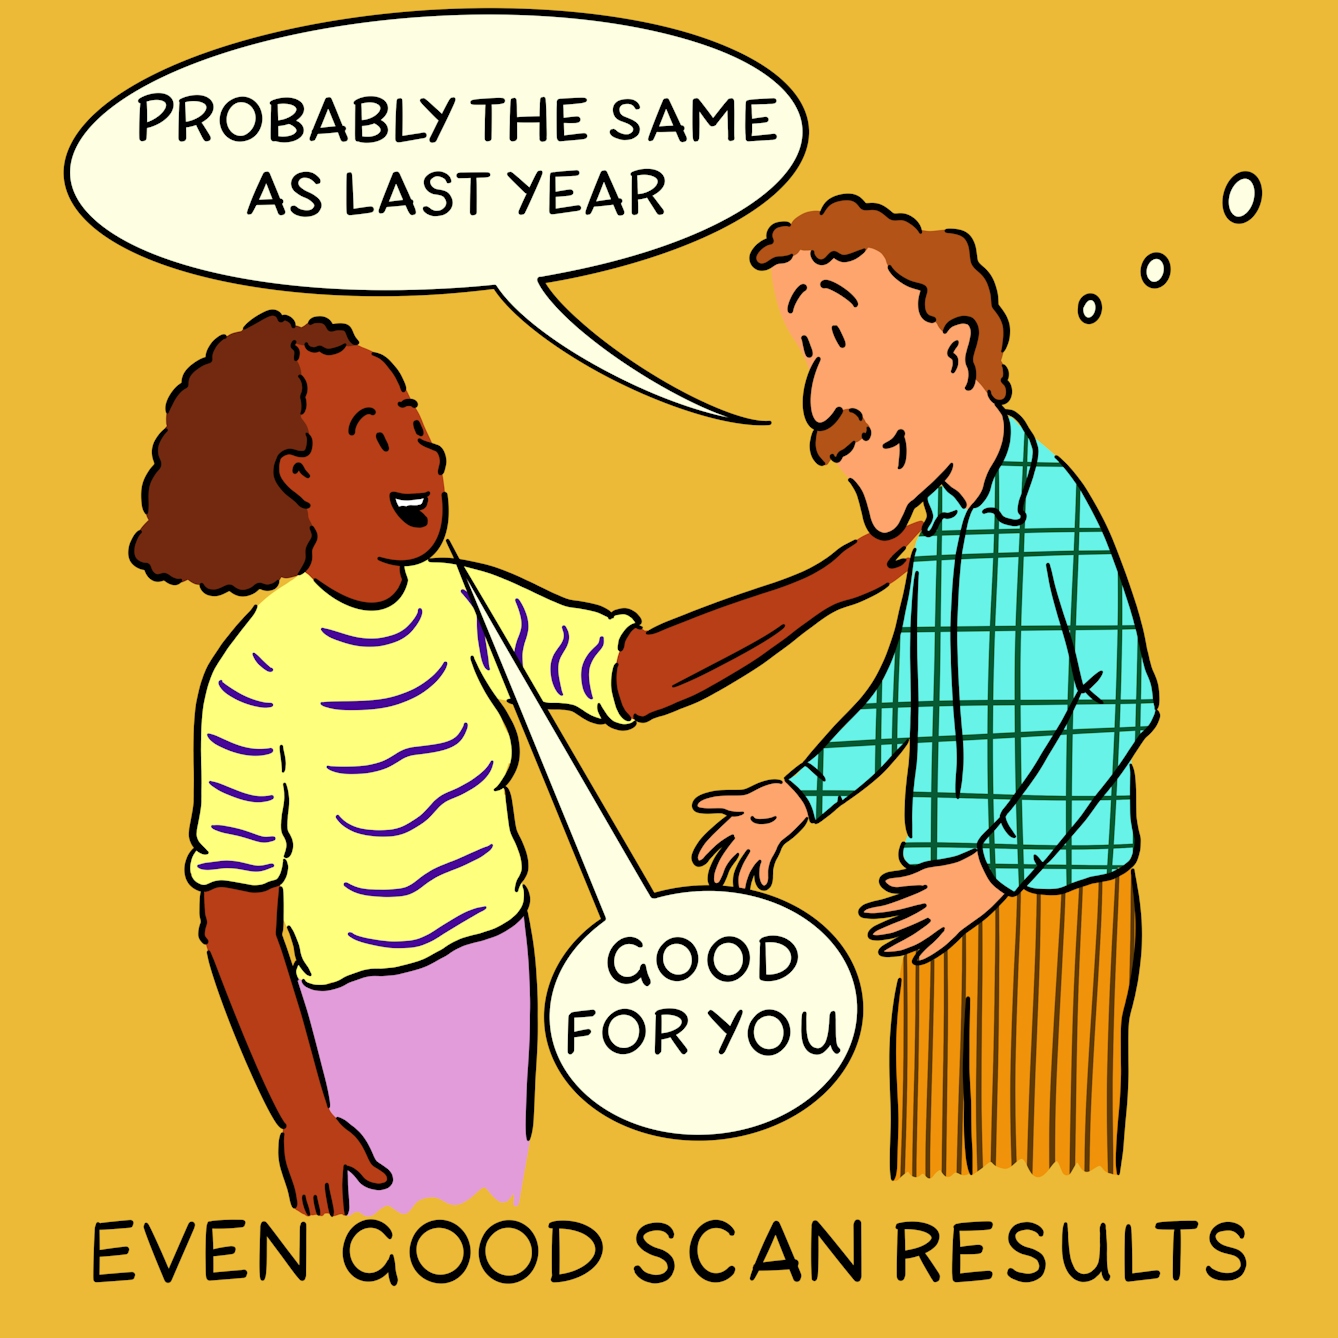 Panel 3 of a four-panel comic drawn digitally: a white man with a moustache and a plaid shirt smiles gently and says "Probably the same as last year" to which a black woman with a stripy yellow shirt places a hand on his shoulder and responds "Good for you". The caption text reads "Even good results"